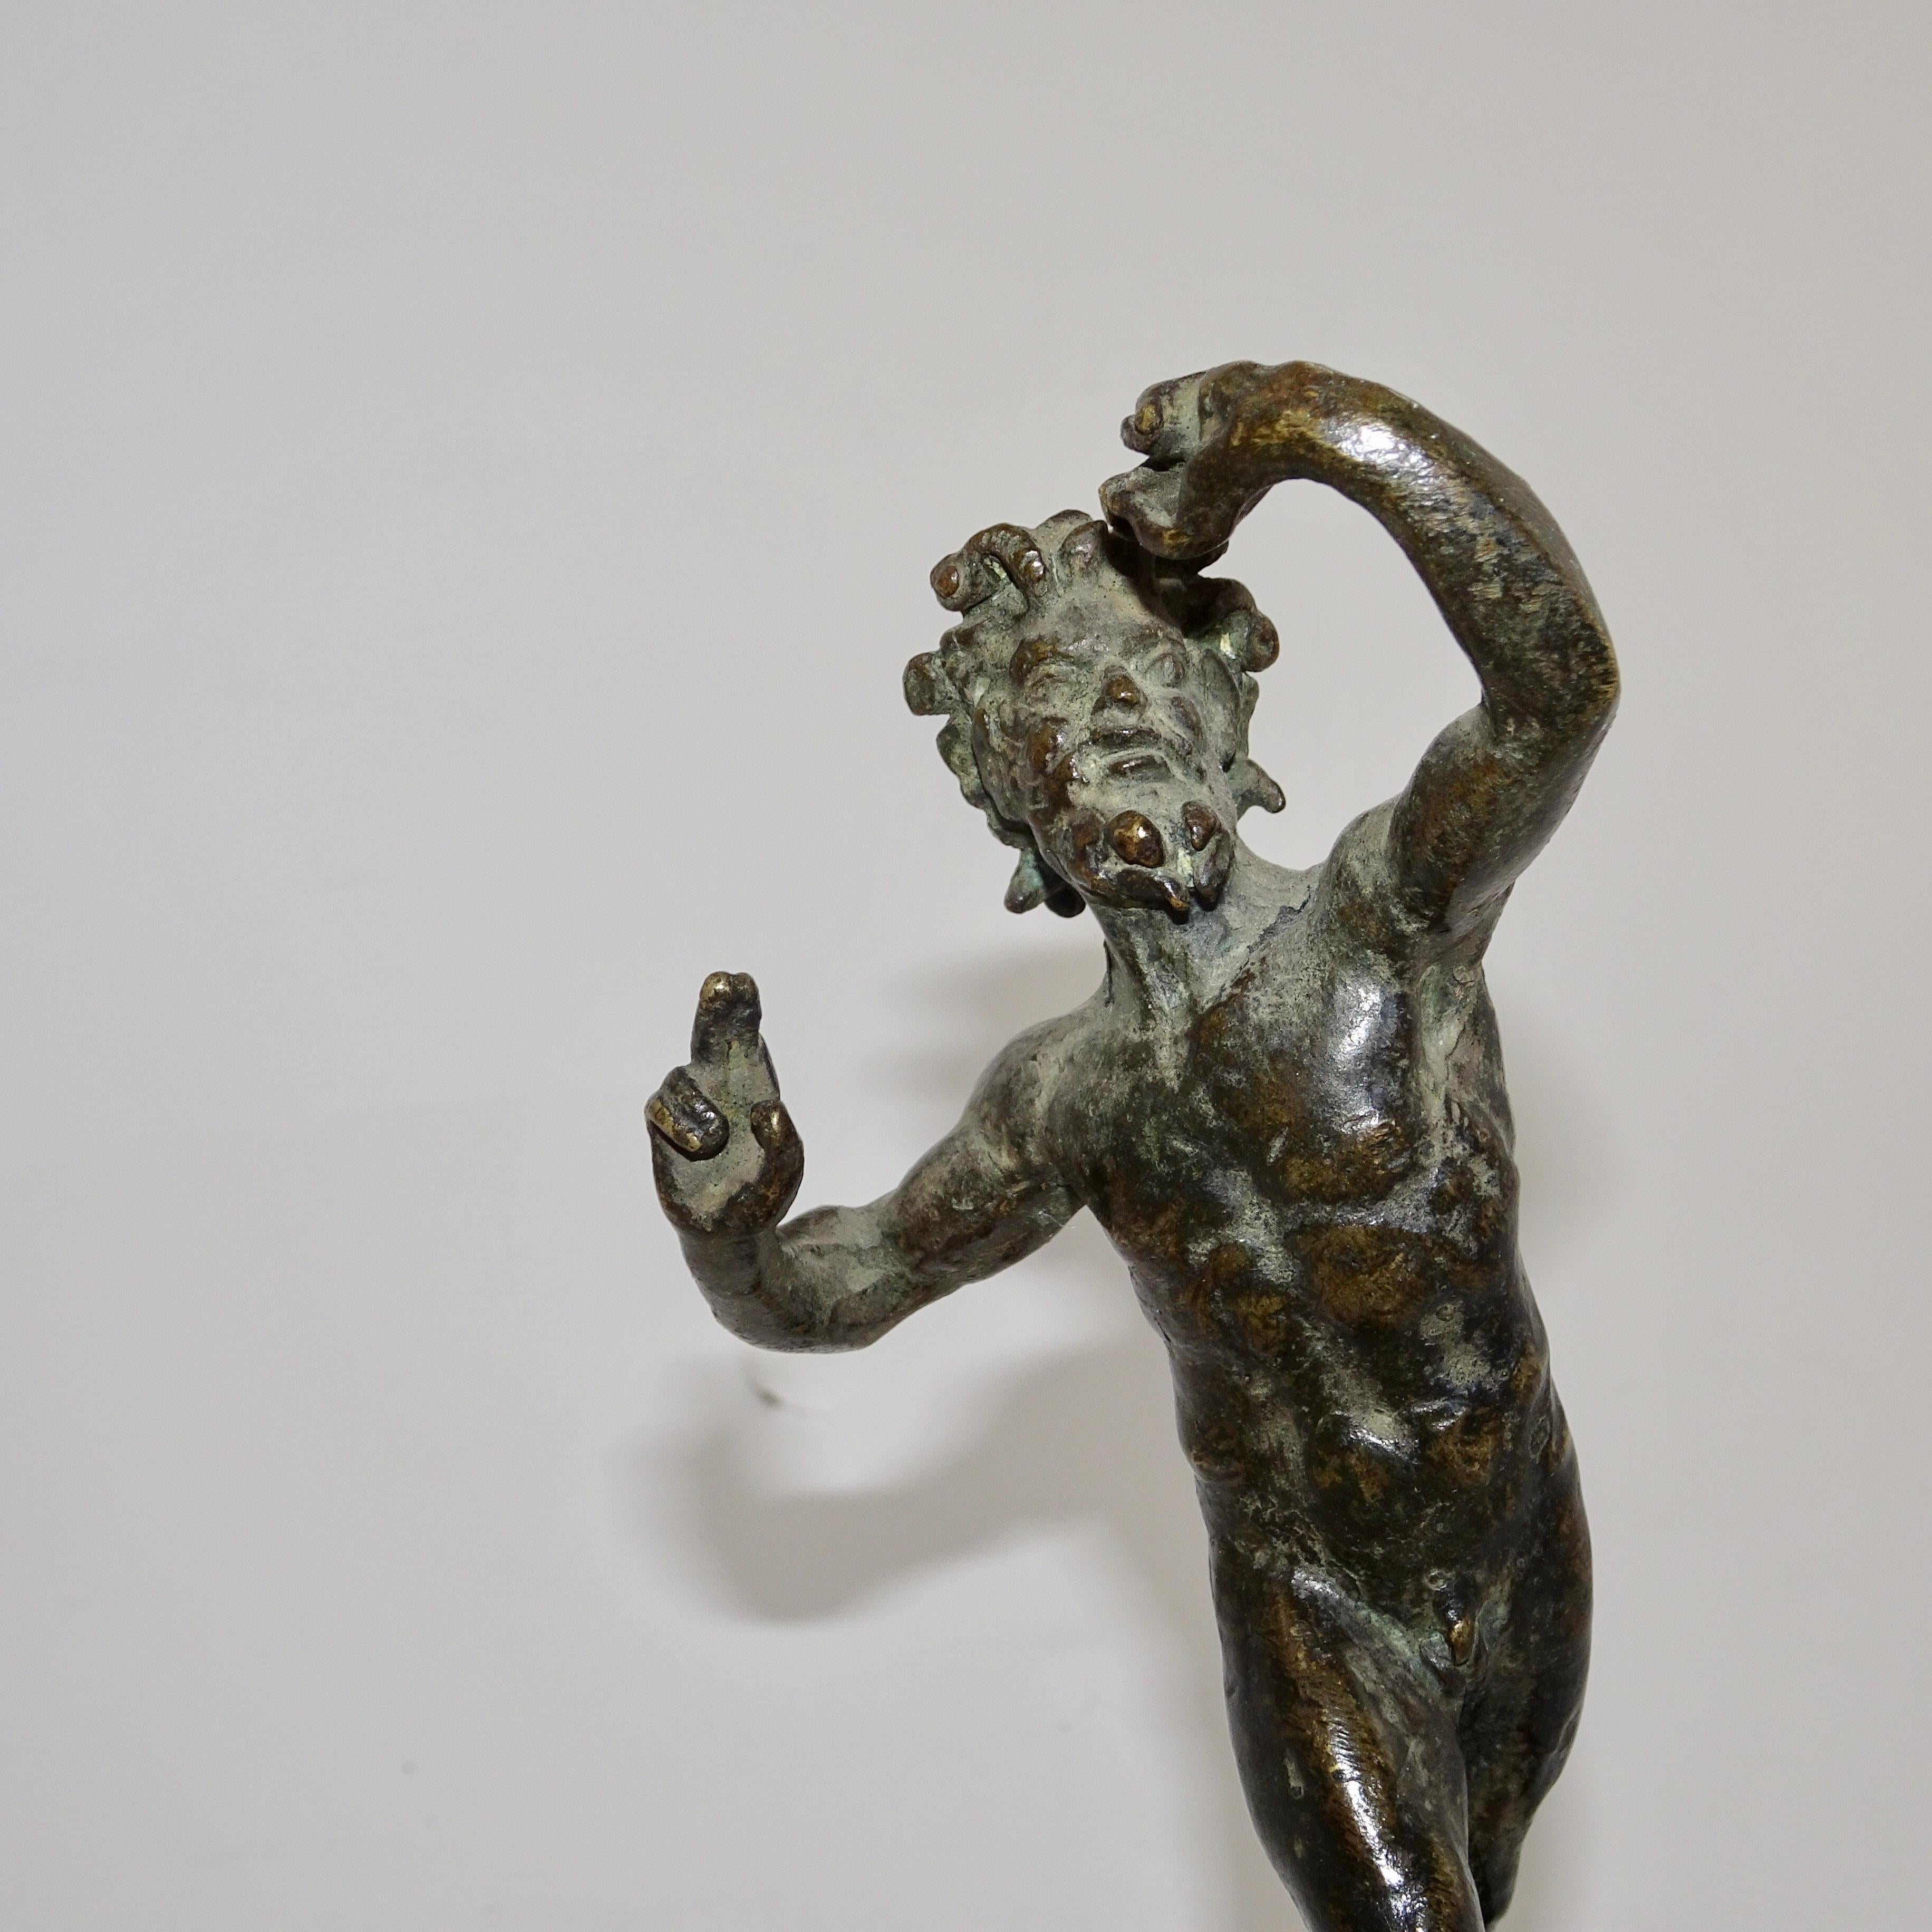 19th century black bronze statuette of Biblical Man on black base. The arm and hand placement of the man is historically representative of Jesus.